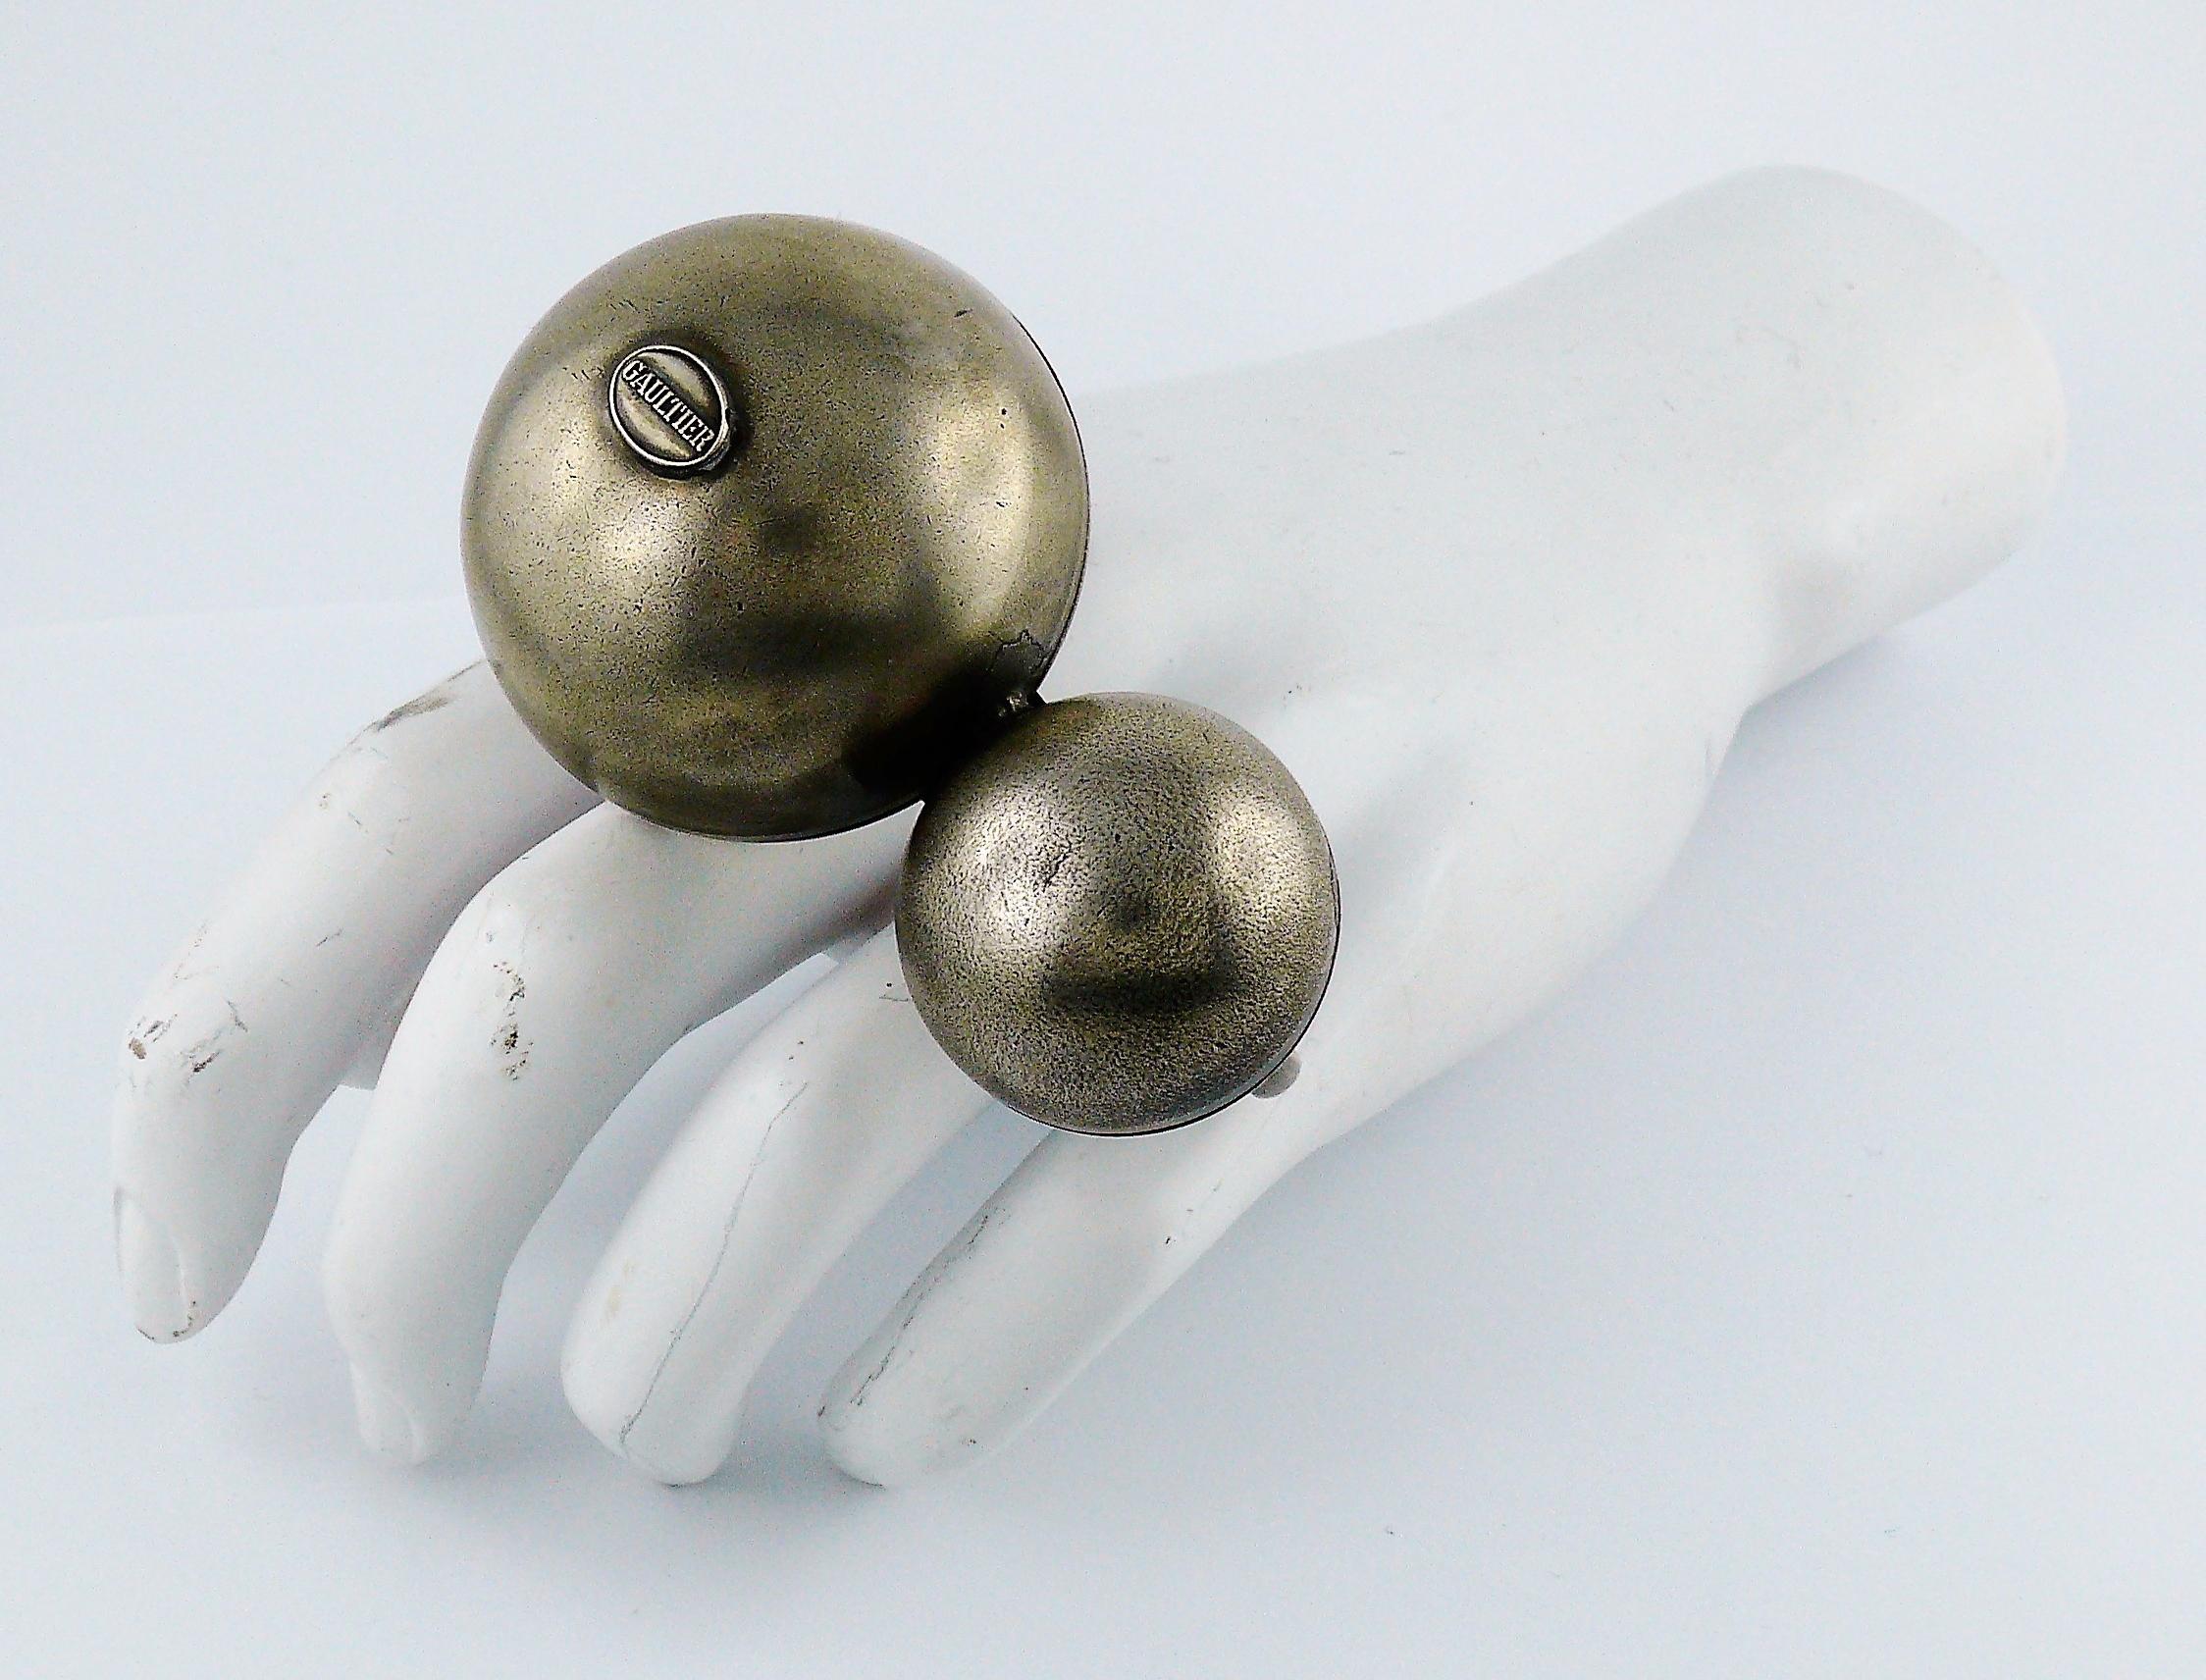 JEAN PAUL GAULTIER vintage incredibly huge antiqued silver toned double ring featuring two speres.

Marked GAULTIER.

Indicative measurements : rings inner circumference approx. 5.65 cm (2.22 inches) / diameter of the spheres approx 4.5 cm (1.77